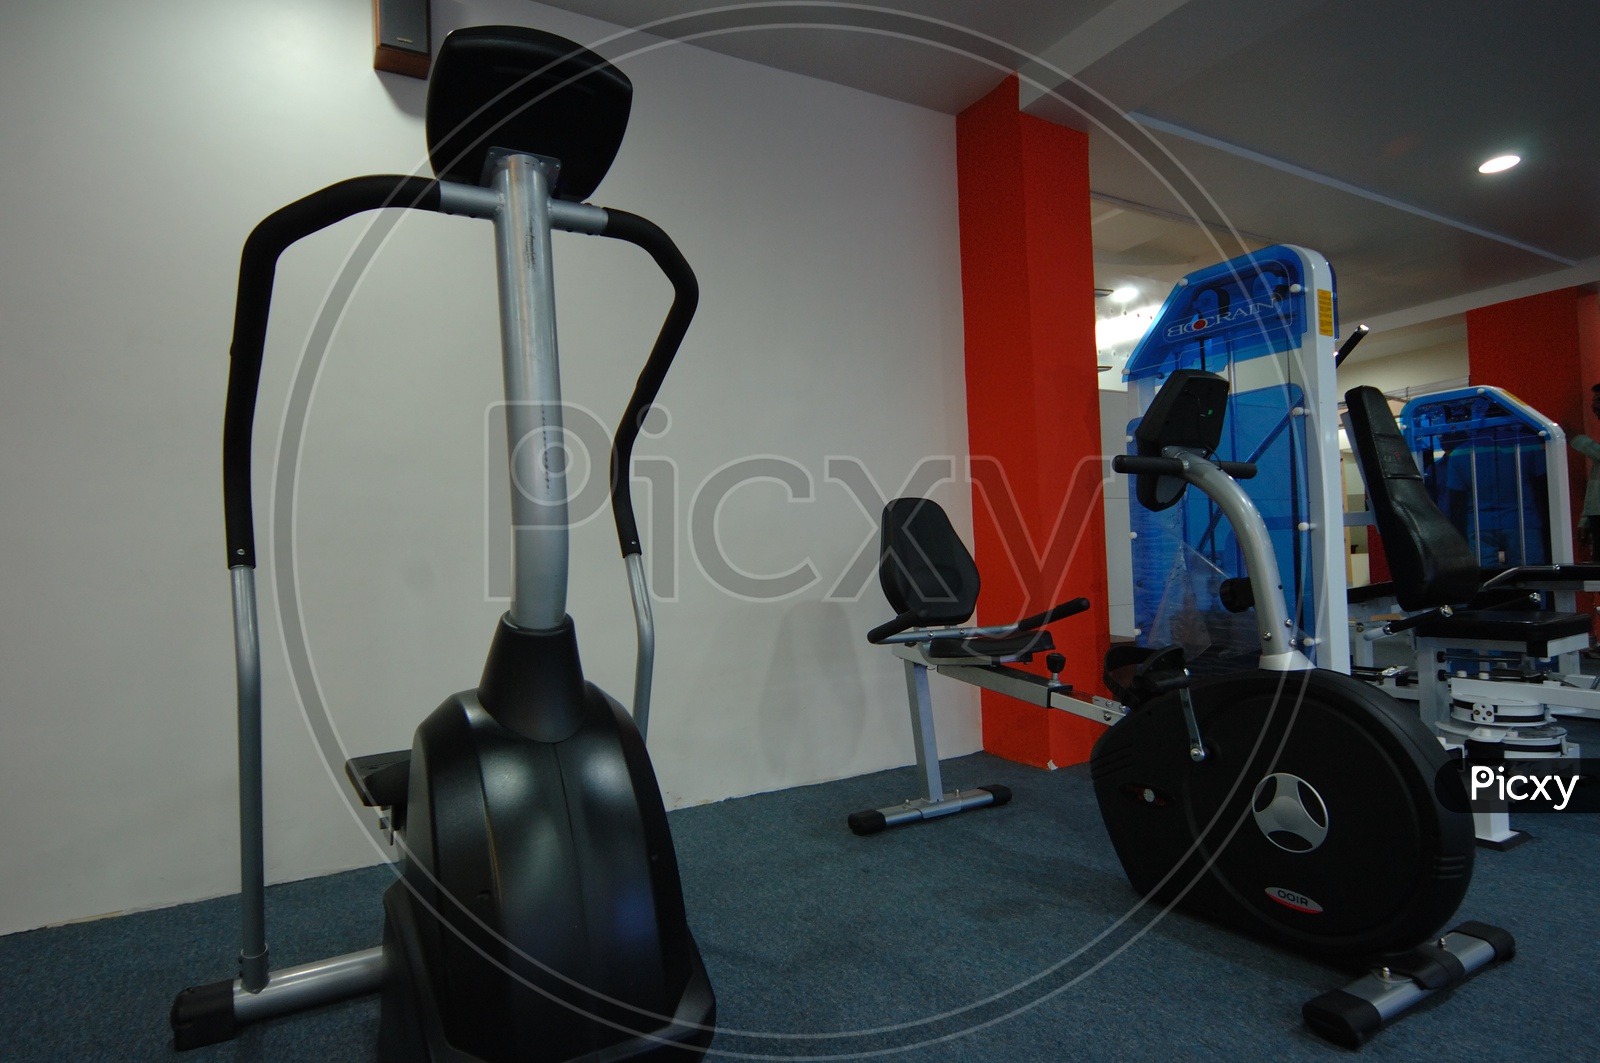 Fitness and strengthening equipment in the gym - Cycles